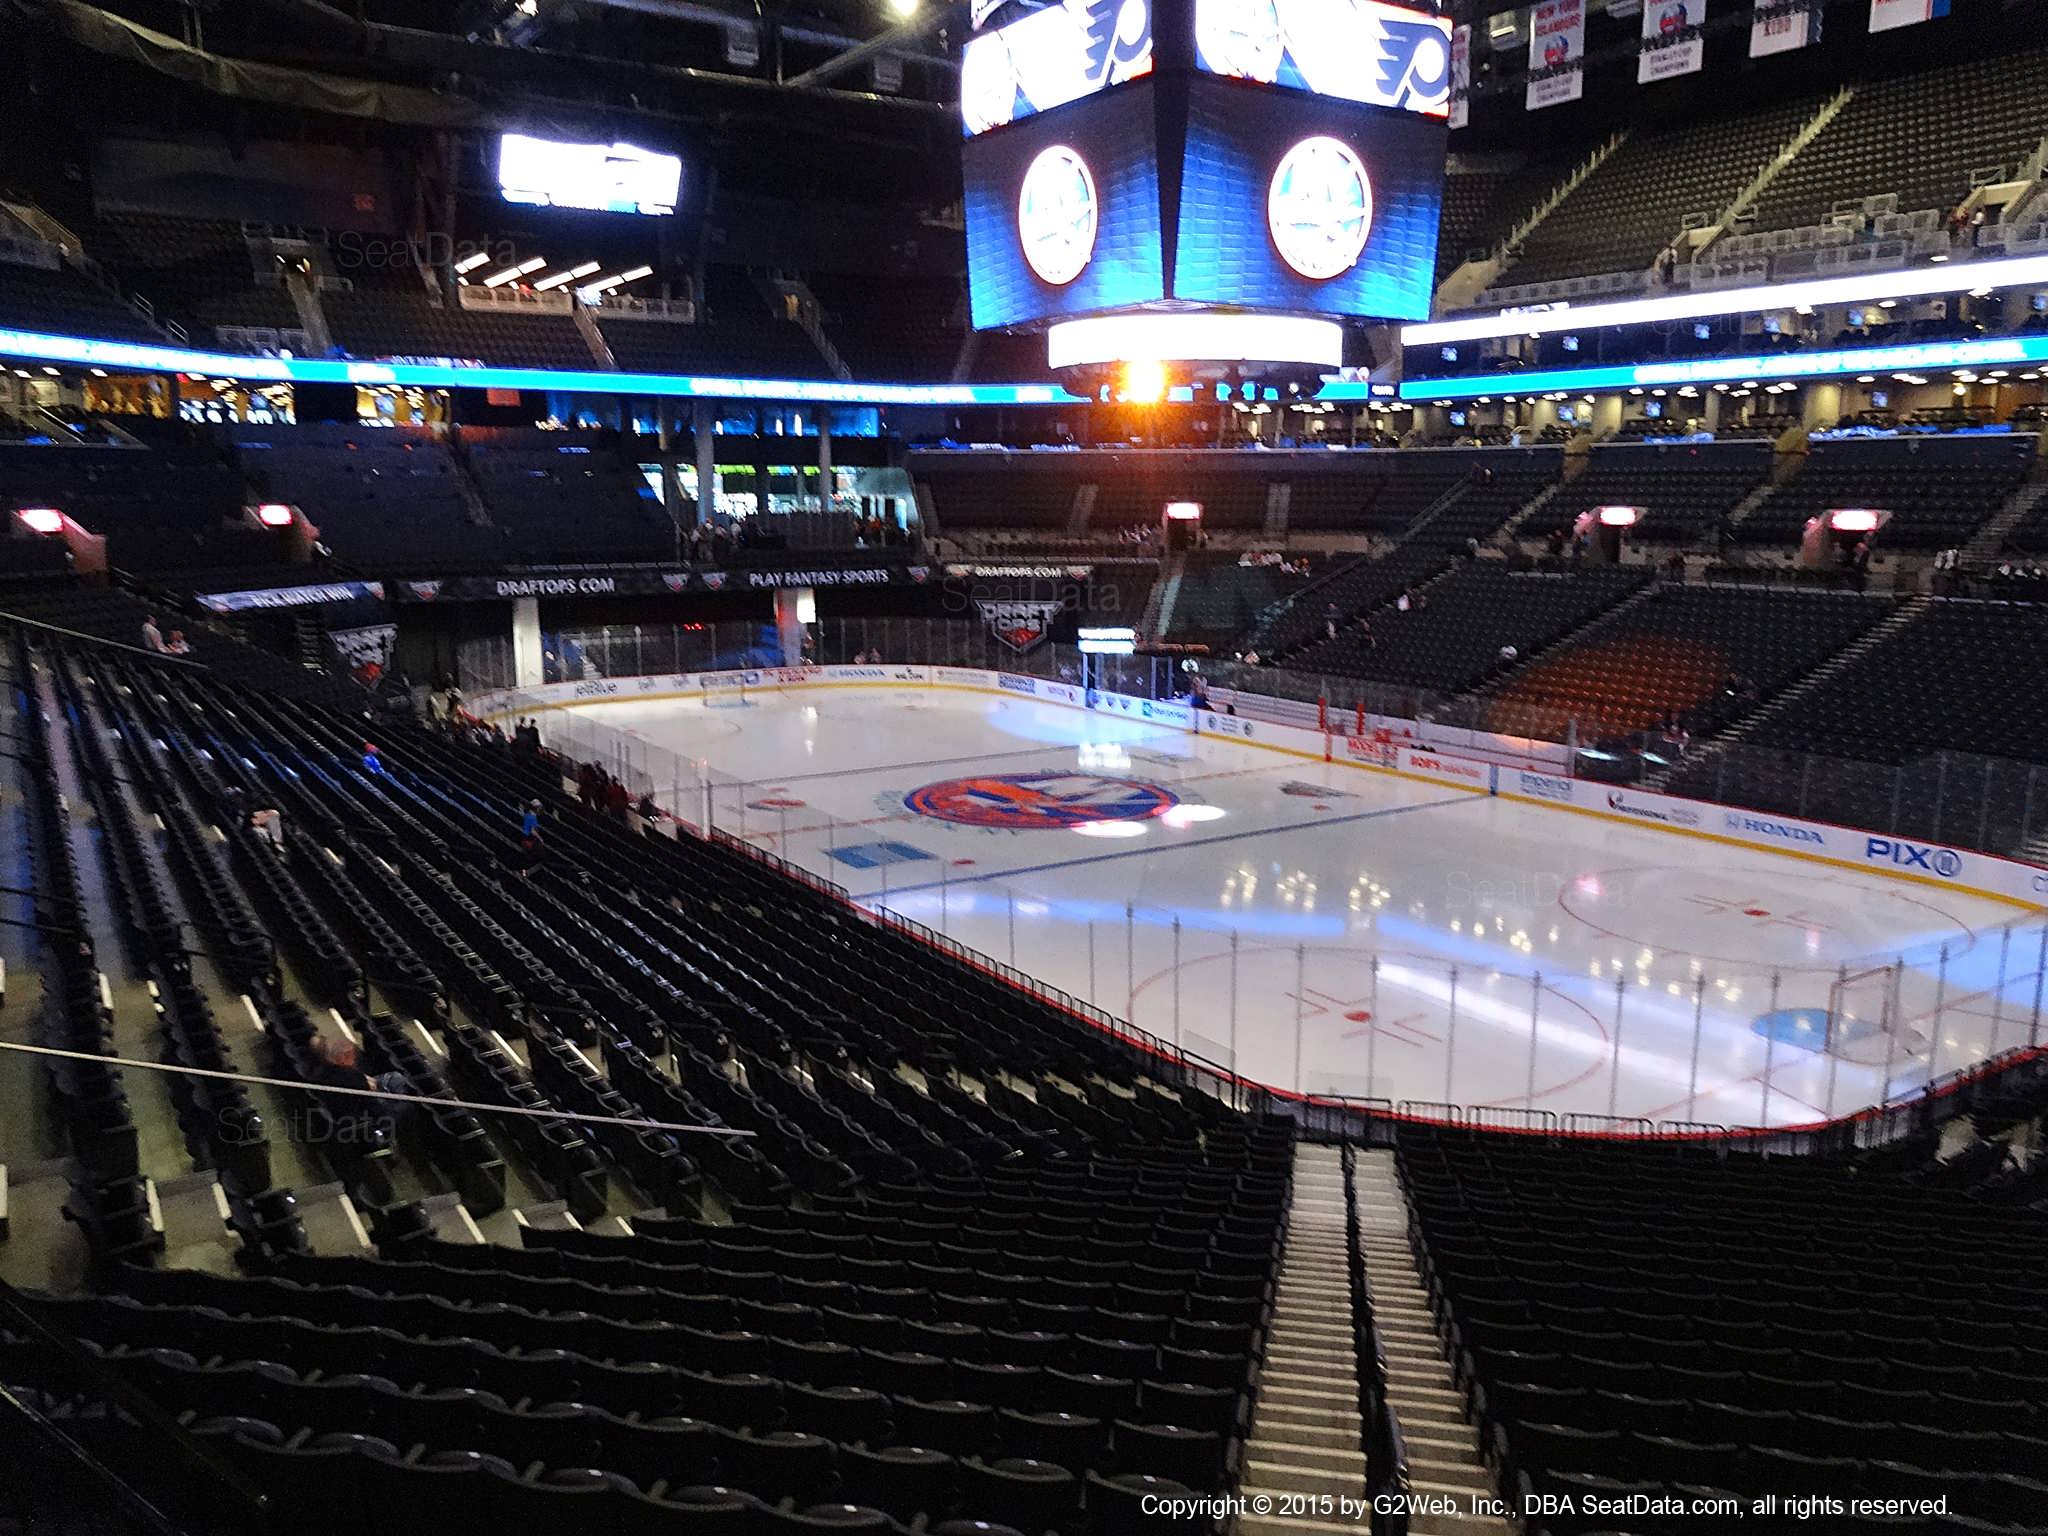 Seat View from Section 120 at the Barclays Center, home of the New York Islanders